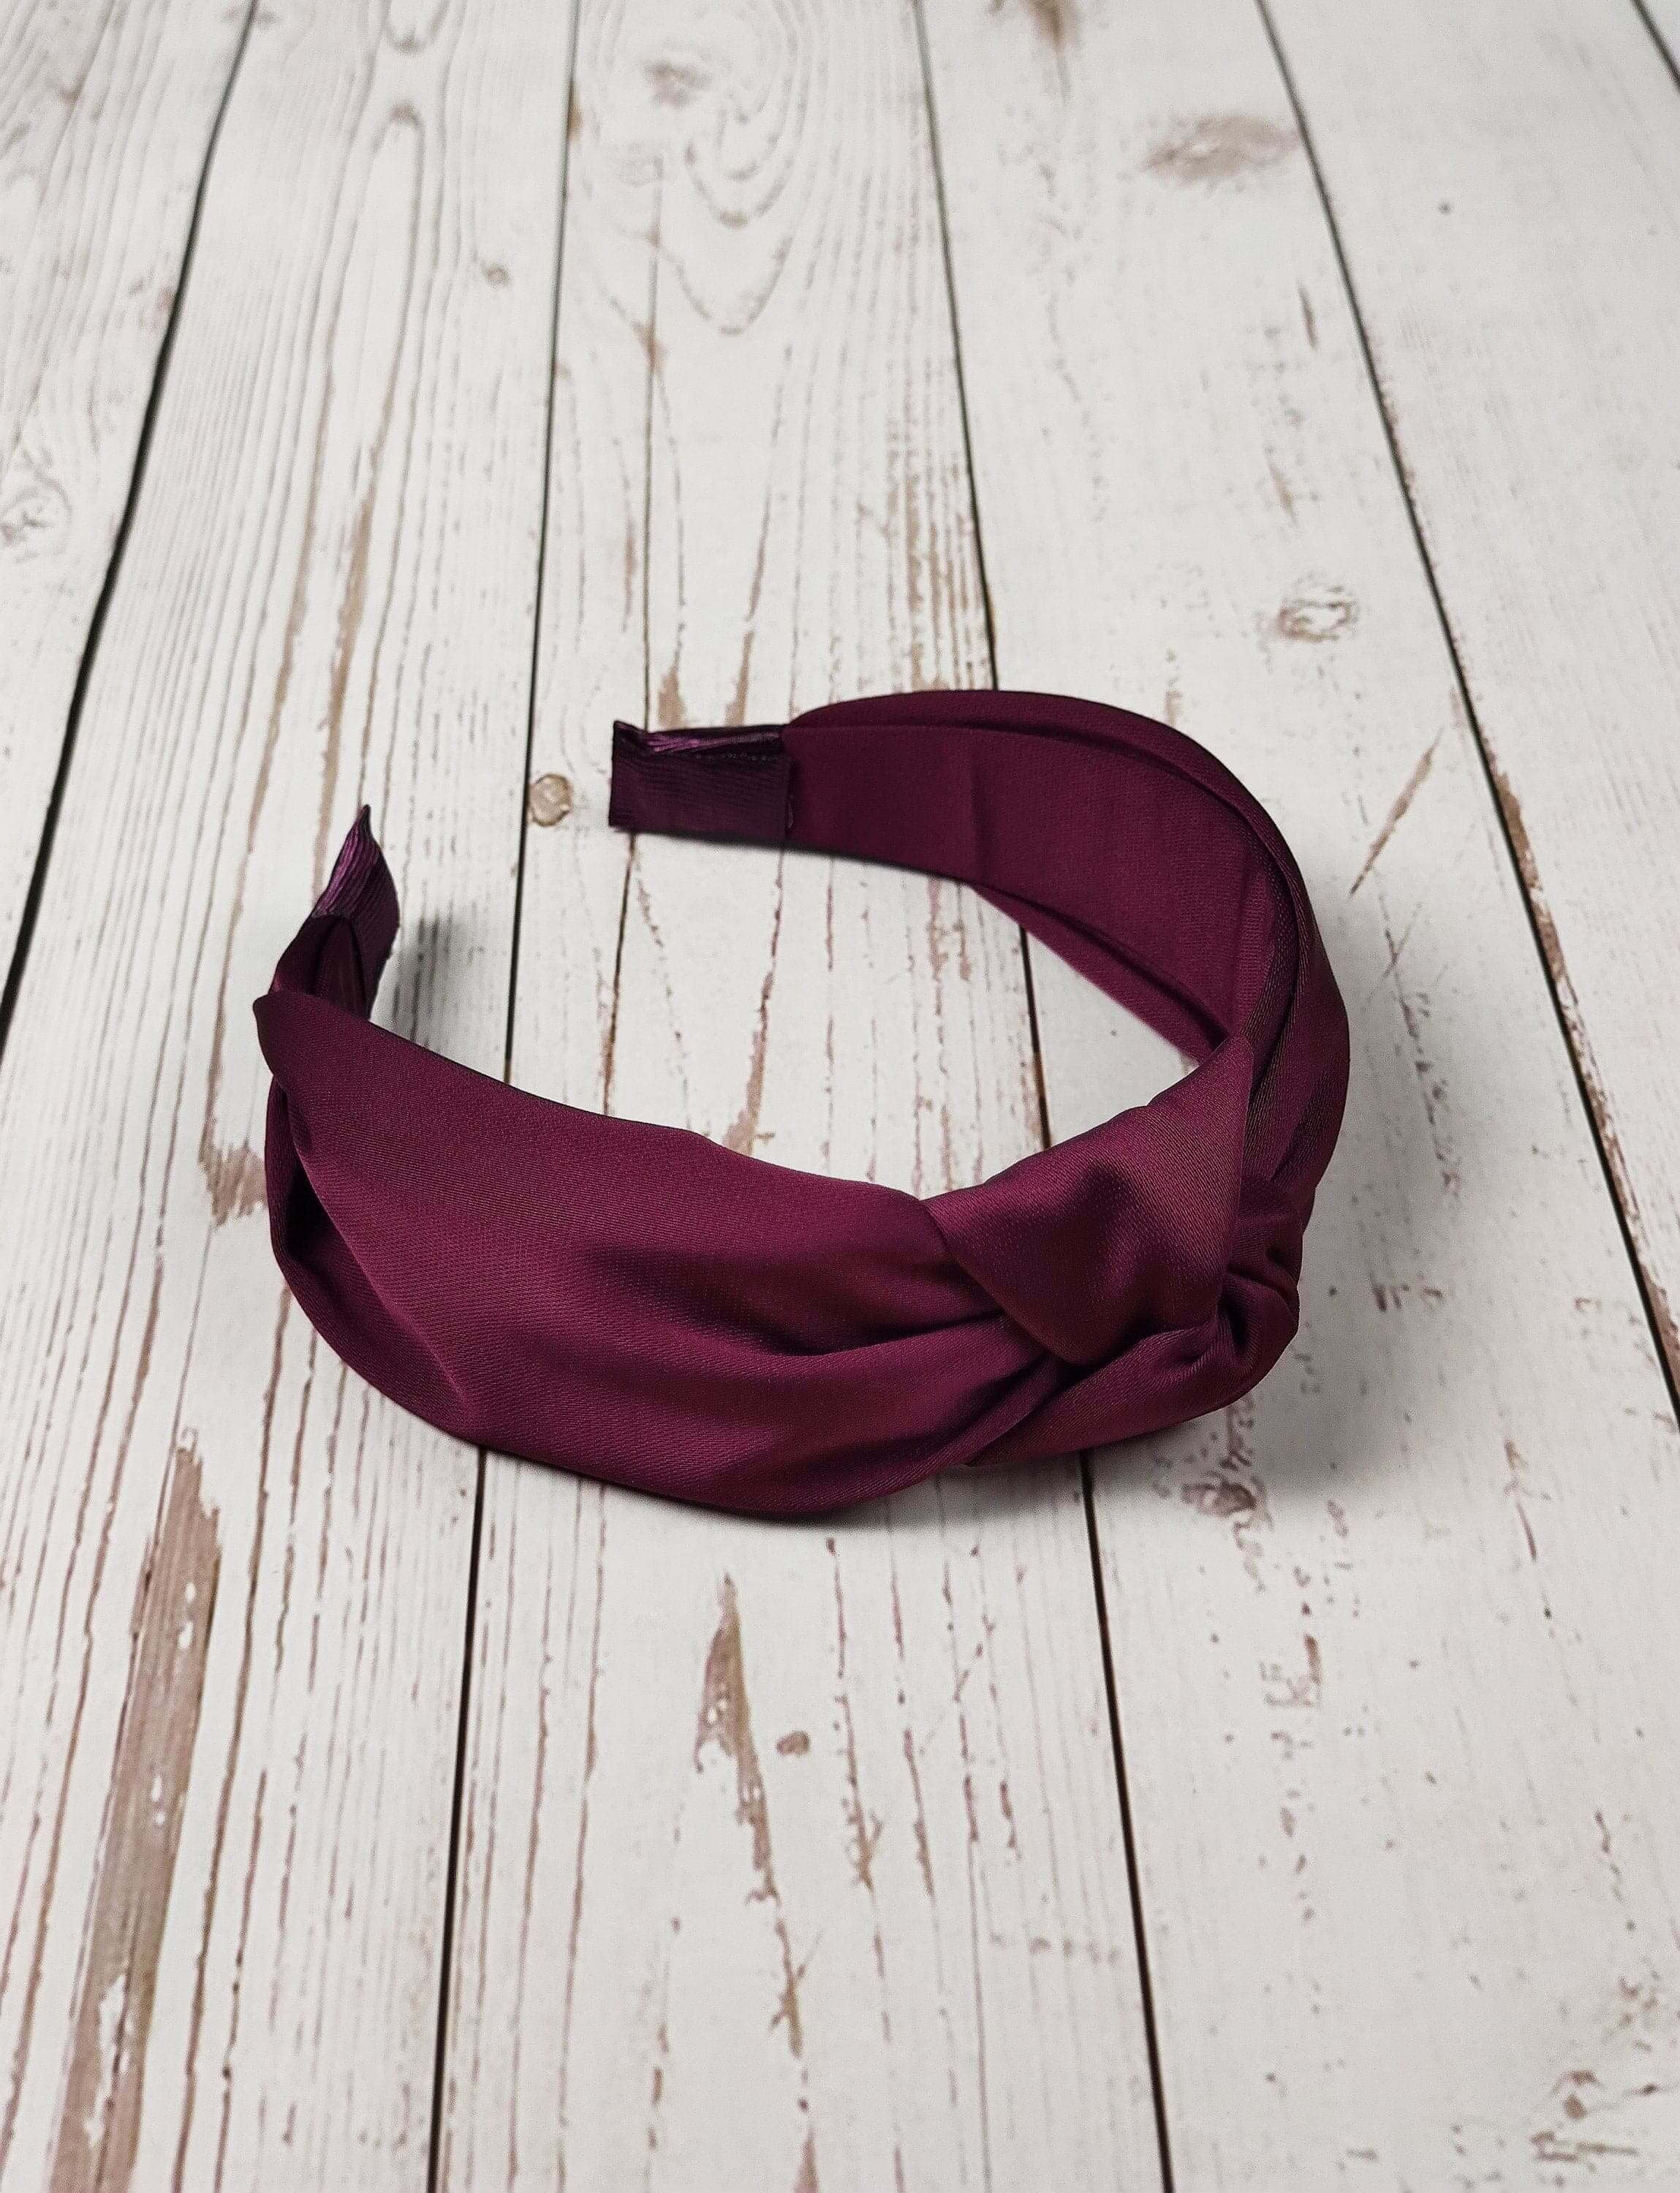 The perfect accessory for any occasion: a fashionable maroon satin knotted headband.